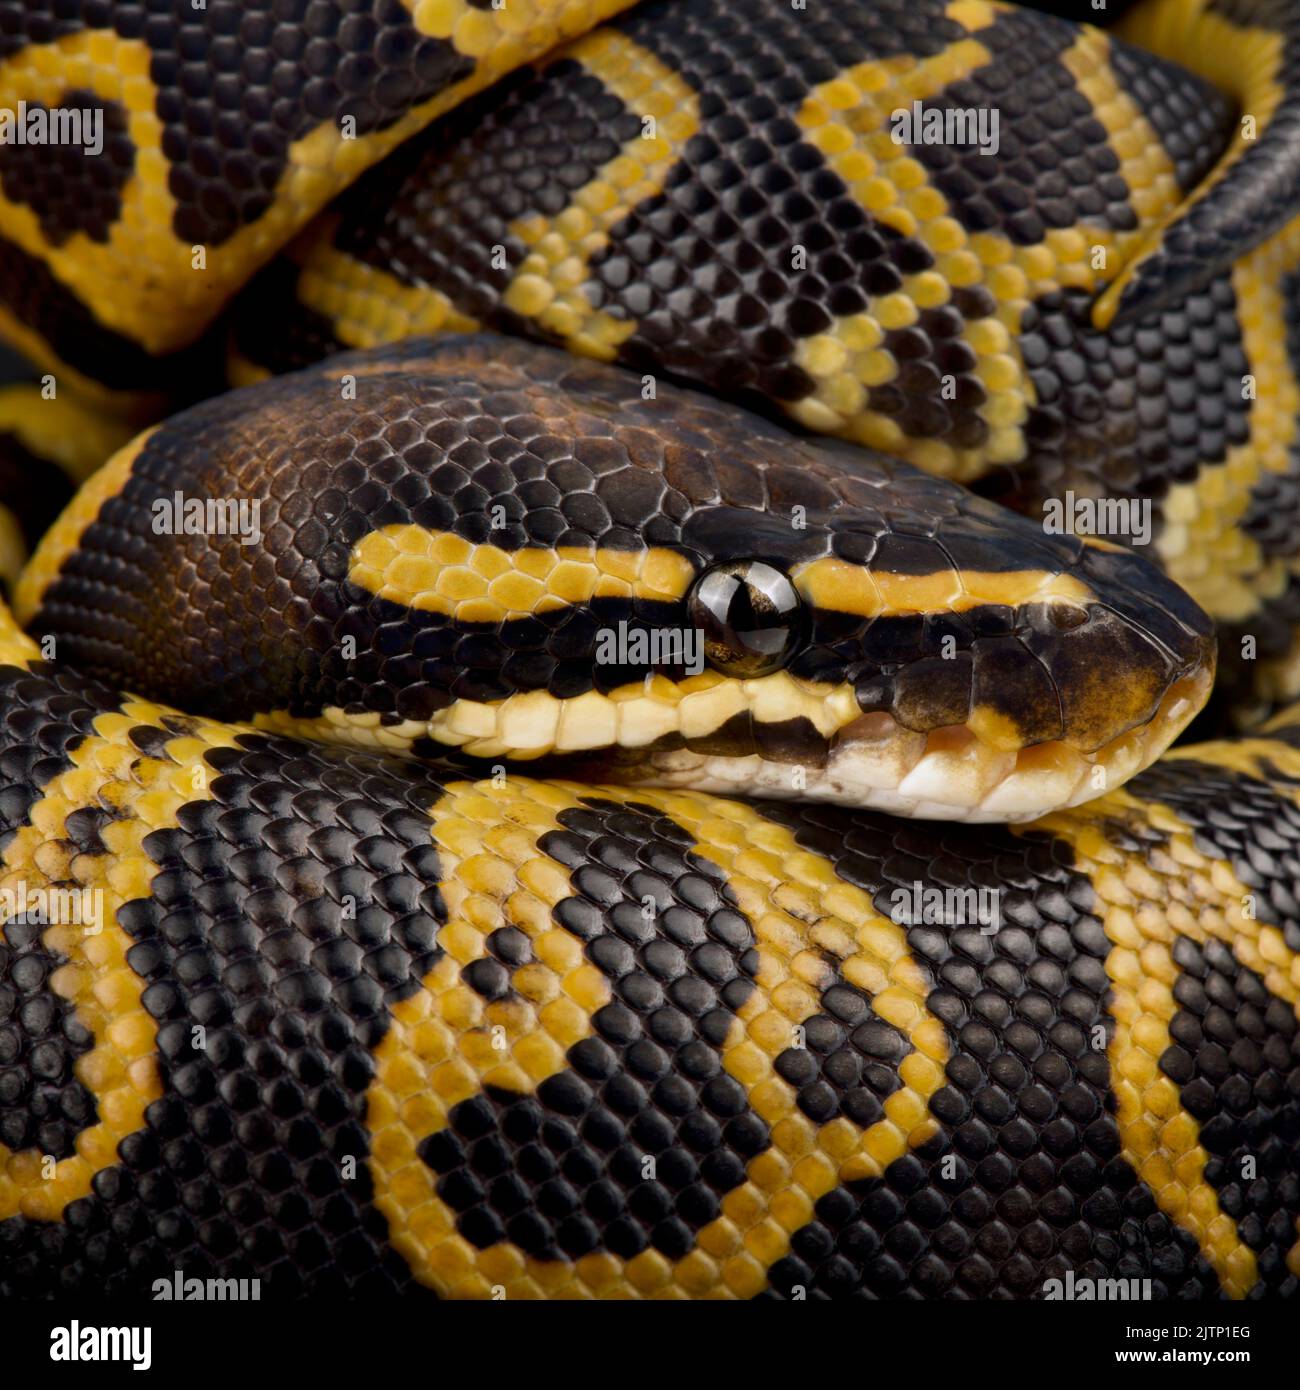 The Ball python (Python regius) is the most popular pet snake in the world. It is being bred in a huge variety of colors. Stock Photo